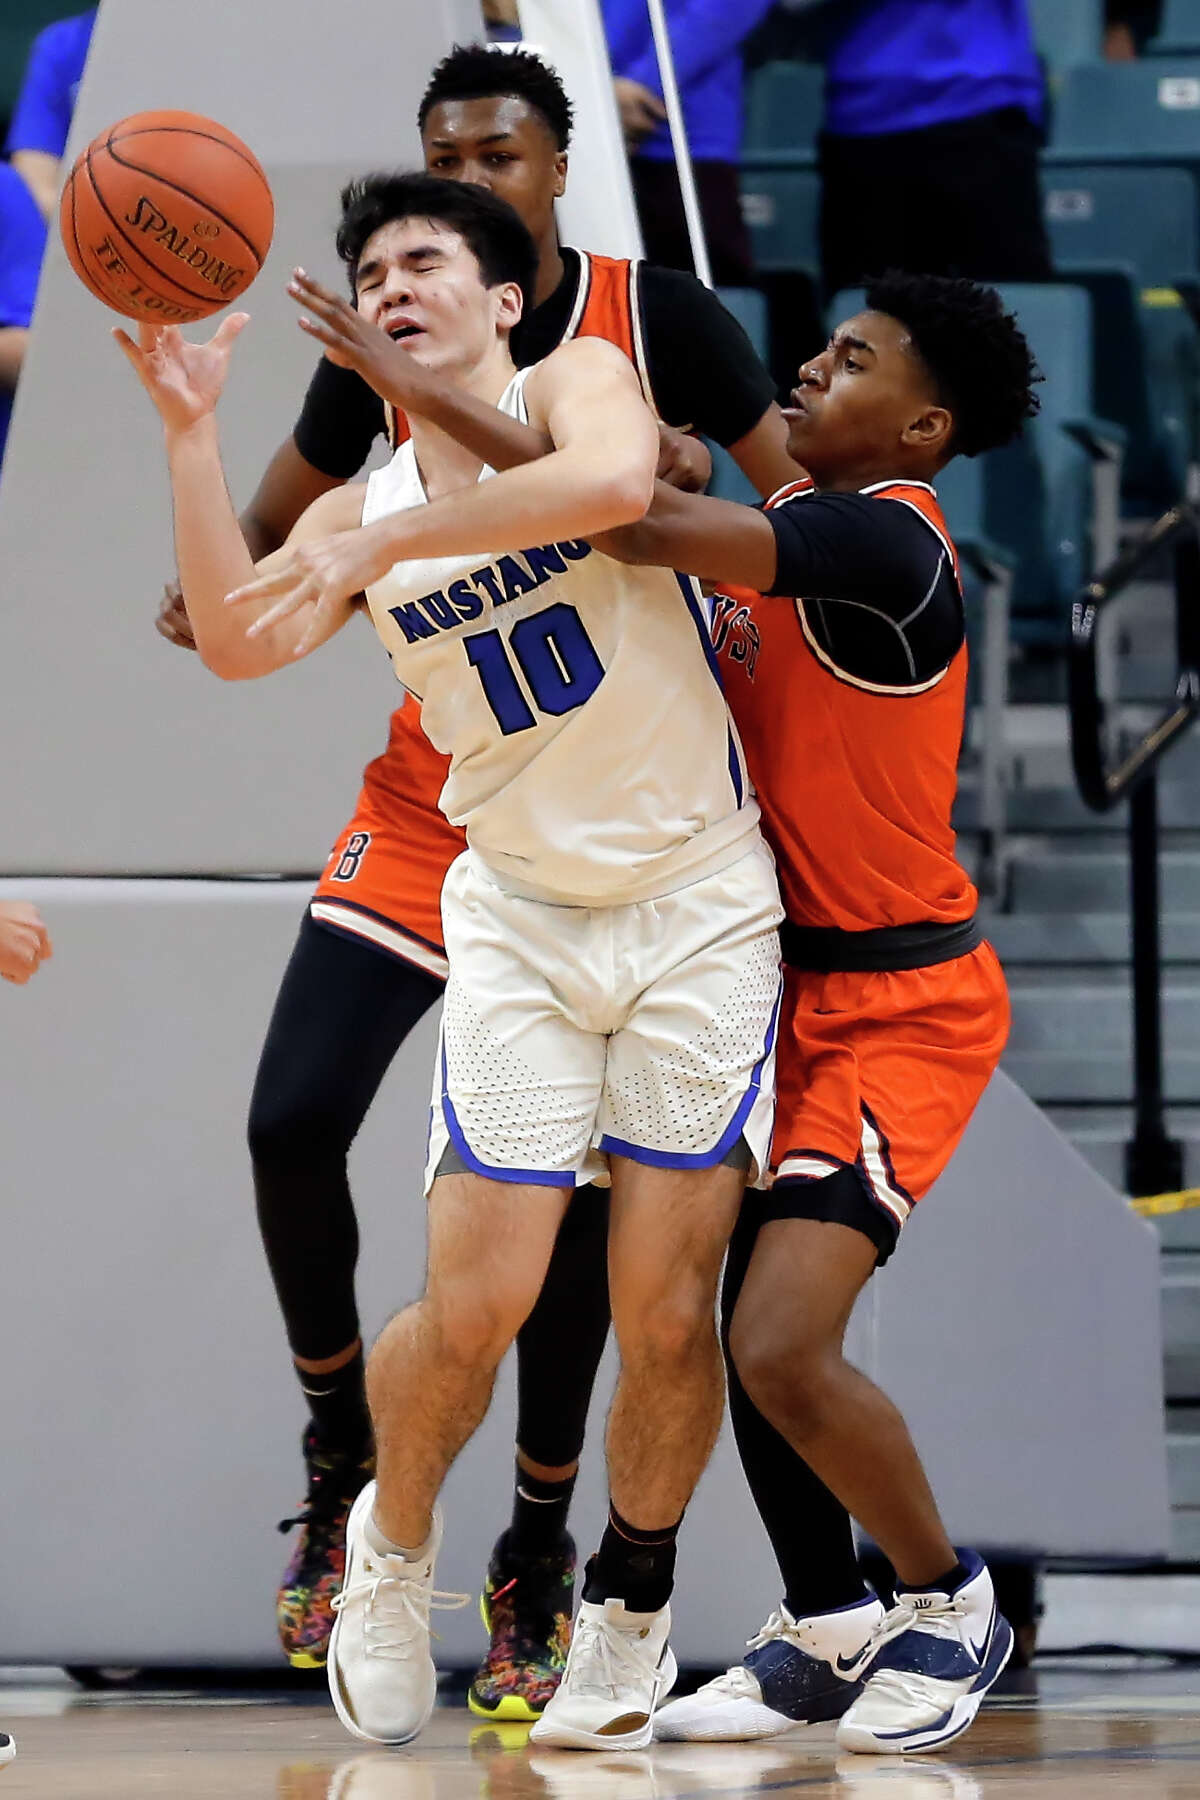 Katy Taylor's Jake Armold (10) is fouled as he passes the ball by Bush's Zion Bourgeois, right, during a 6A district boys high school basketball playoff game Saturday, Feb. 20, 2021 at the Merrell Center in Katy, TX.